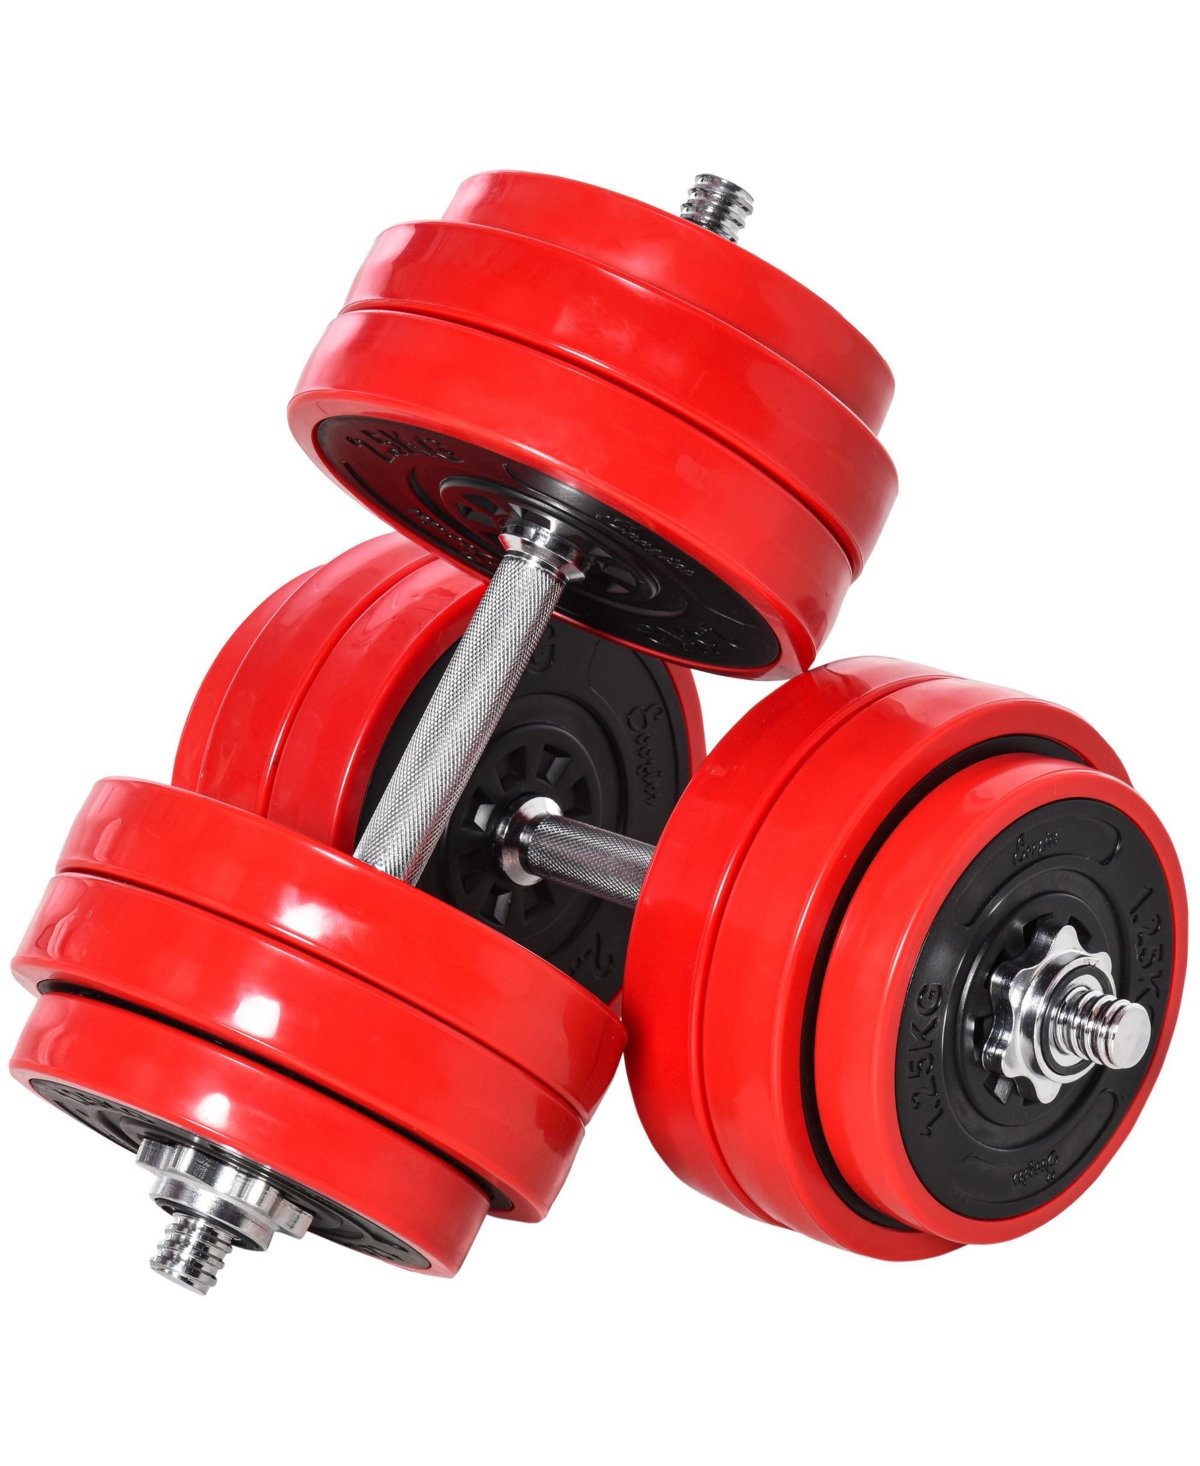 66 lb. 2-in-1 Dumbbell Sets Barbell Set Made for Tight Grip, Weight Set Weight Lifting Strength Training Equipment - Wine red